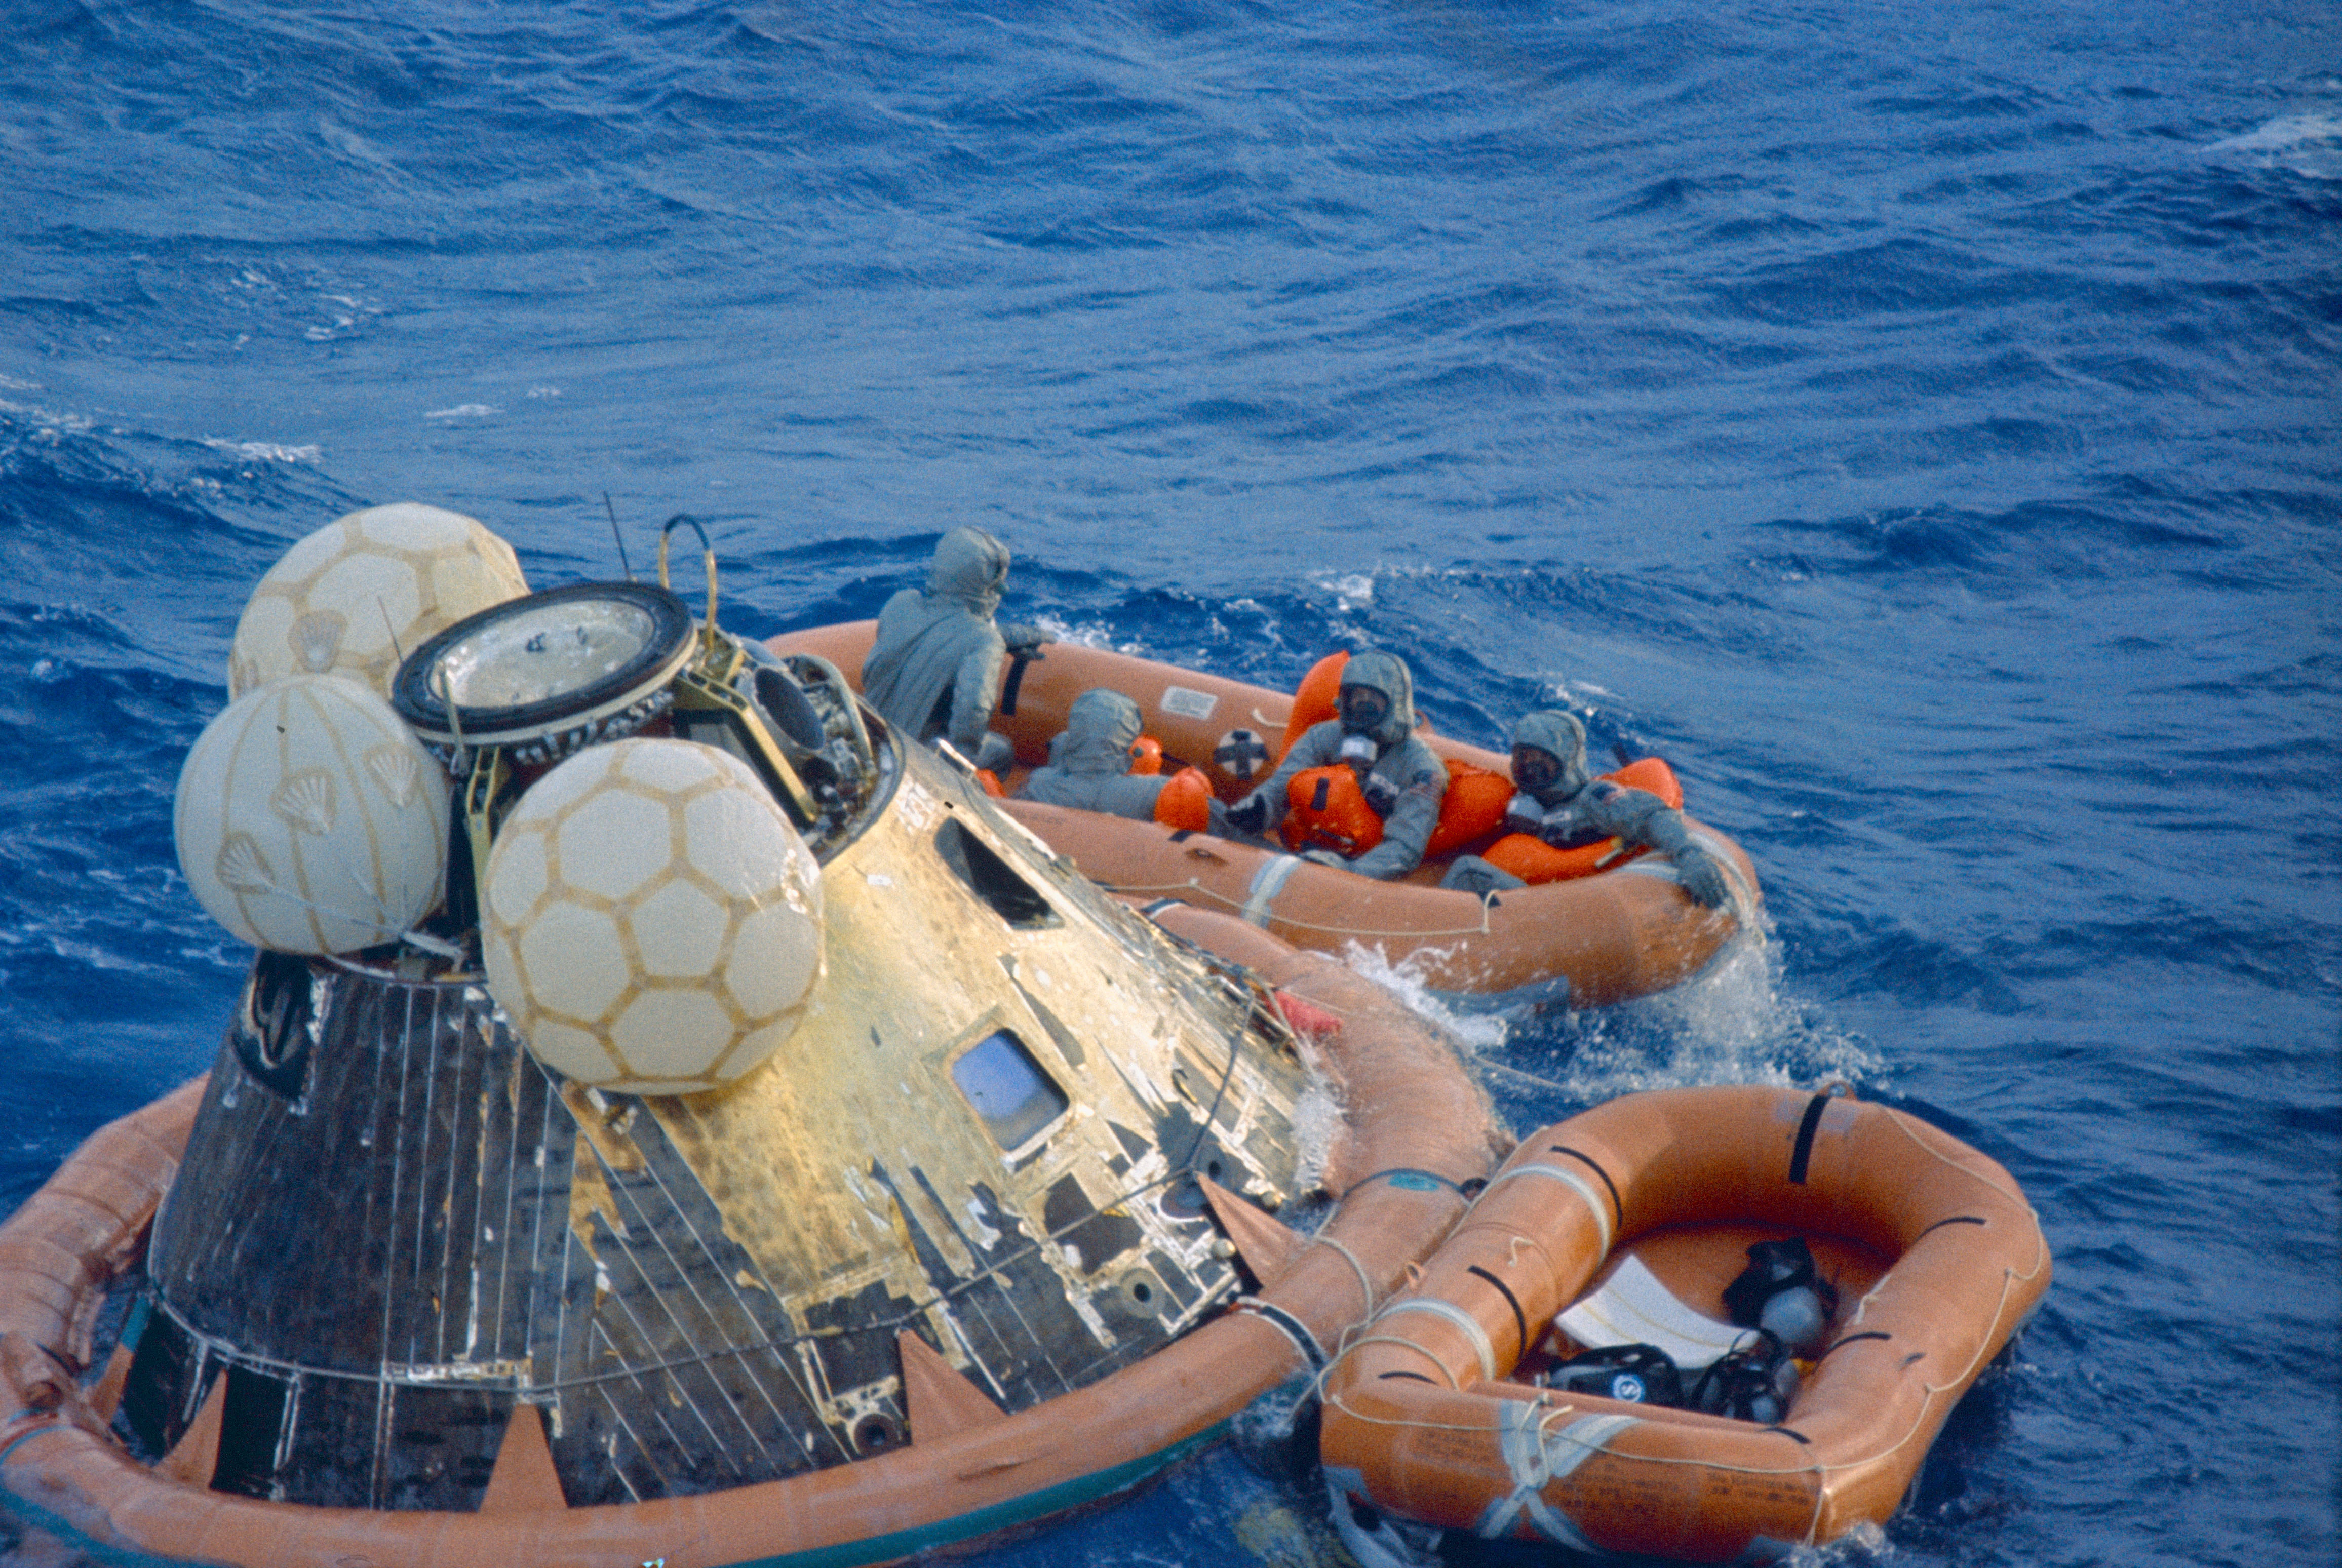 Hatleberg, left, with Neil, Buzz, and Mike in the decontamination raft